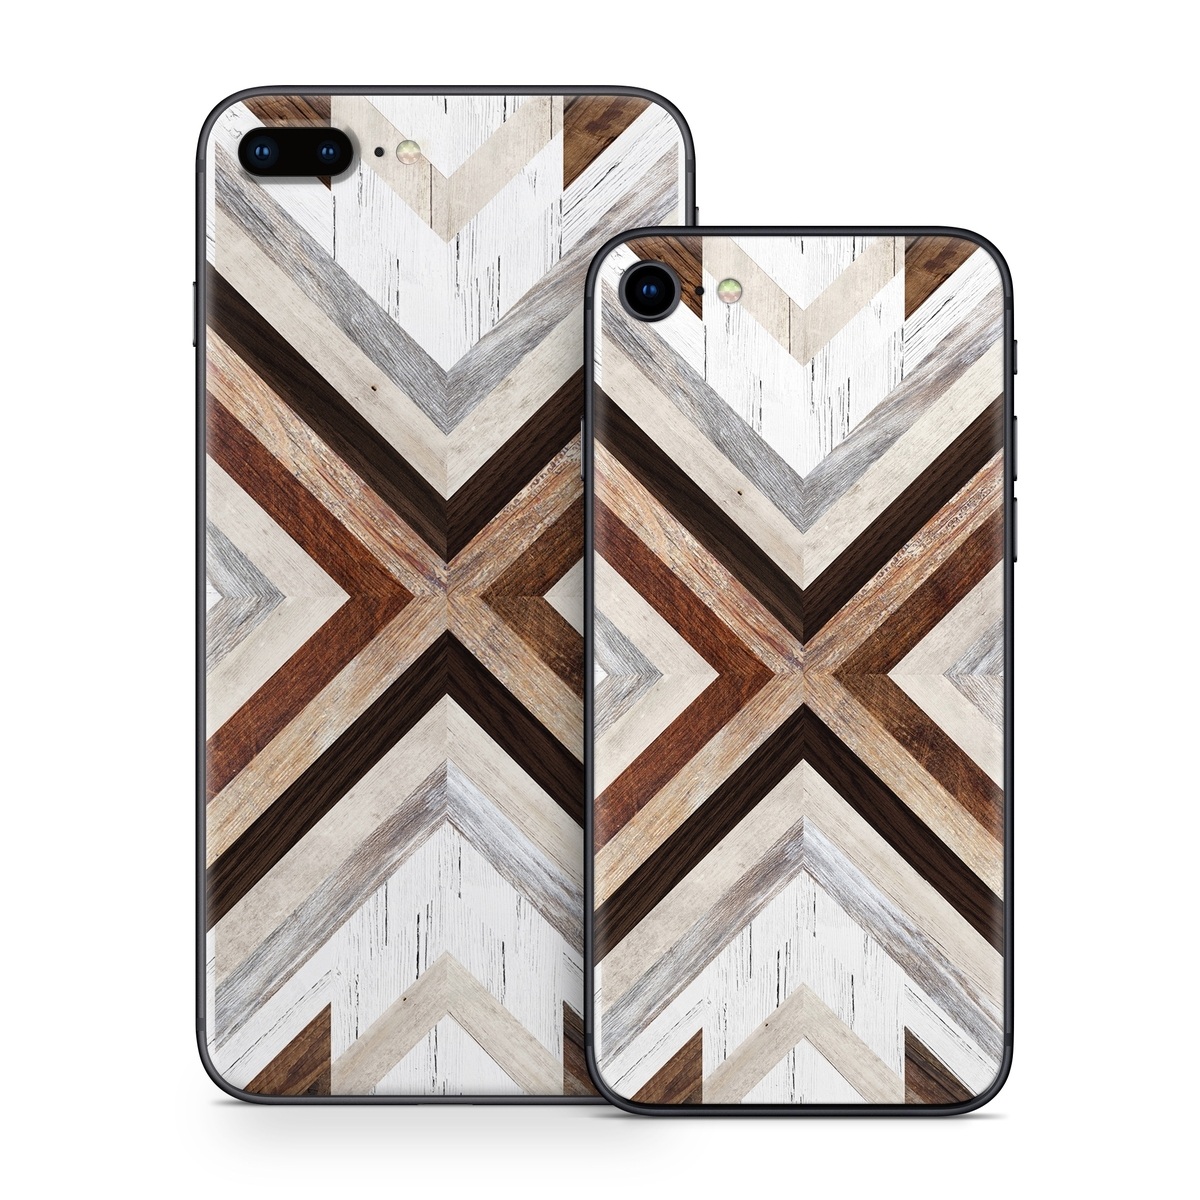 iPhone 8 Series Skin design of Architecture, Line, Pattern, Brown, Symmetry, Wood, Design, Building, Facade, Material property, with white, brown, gray colors